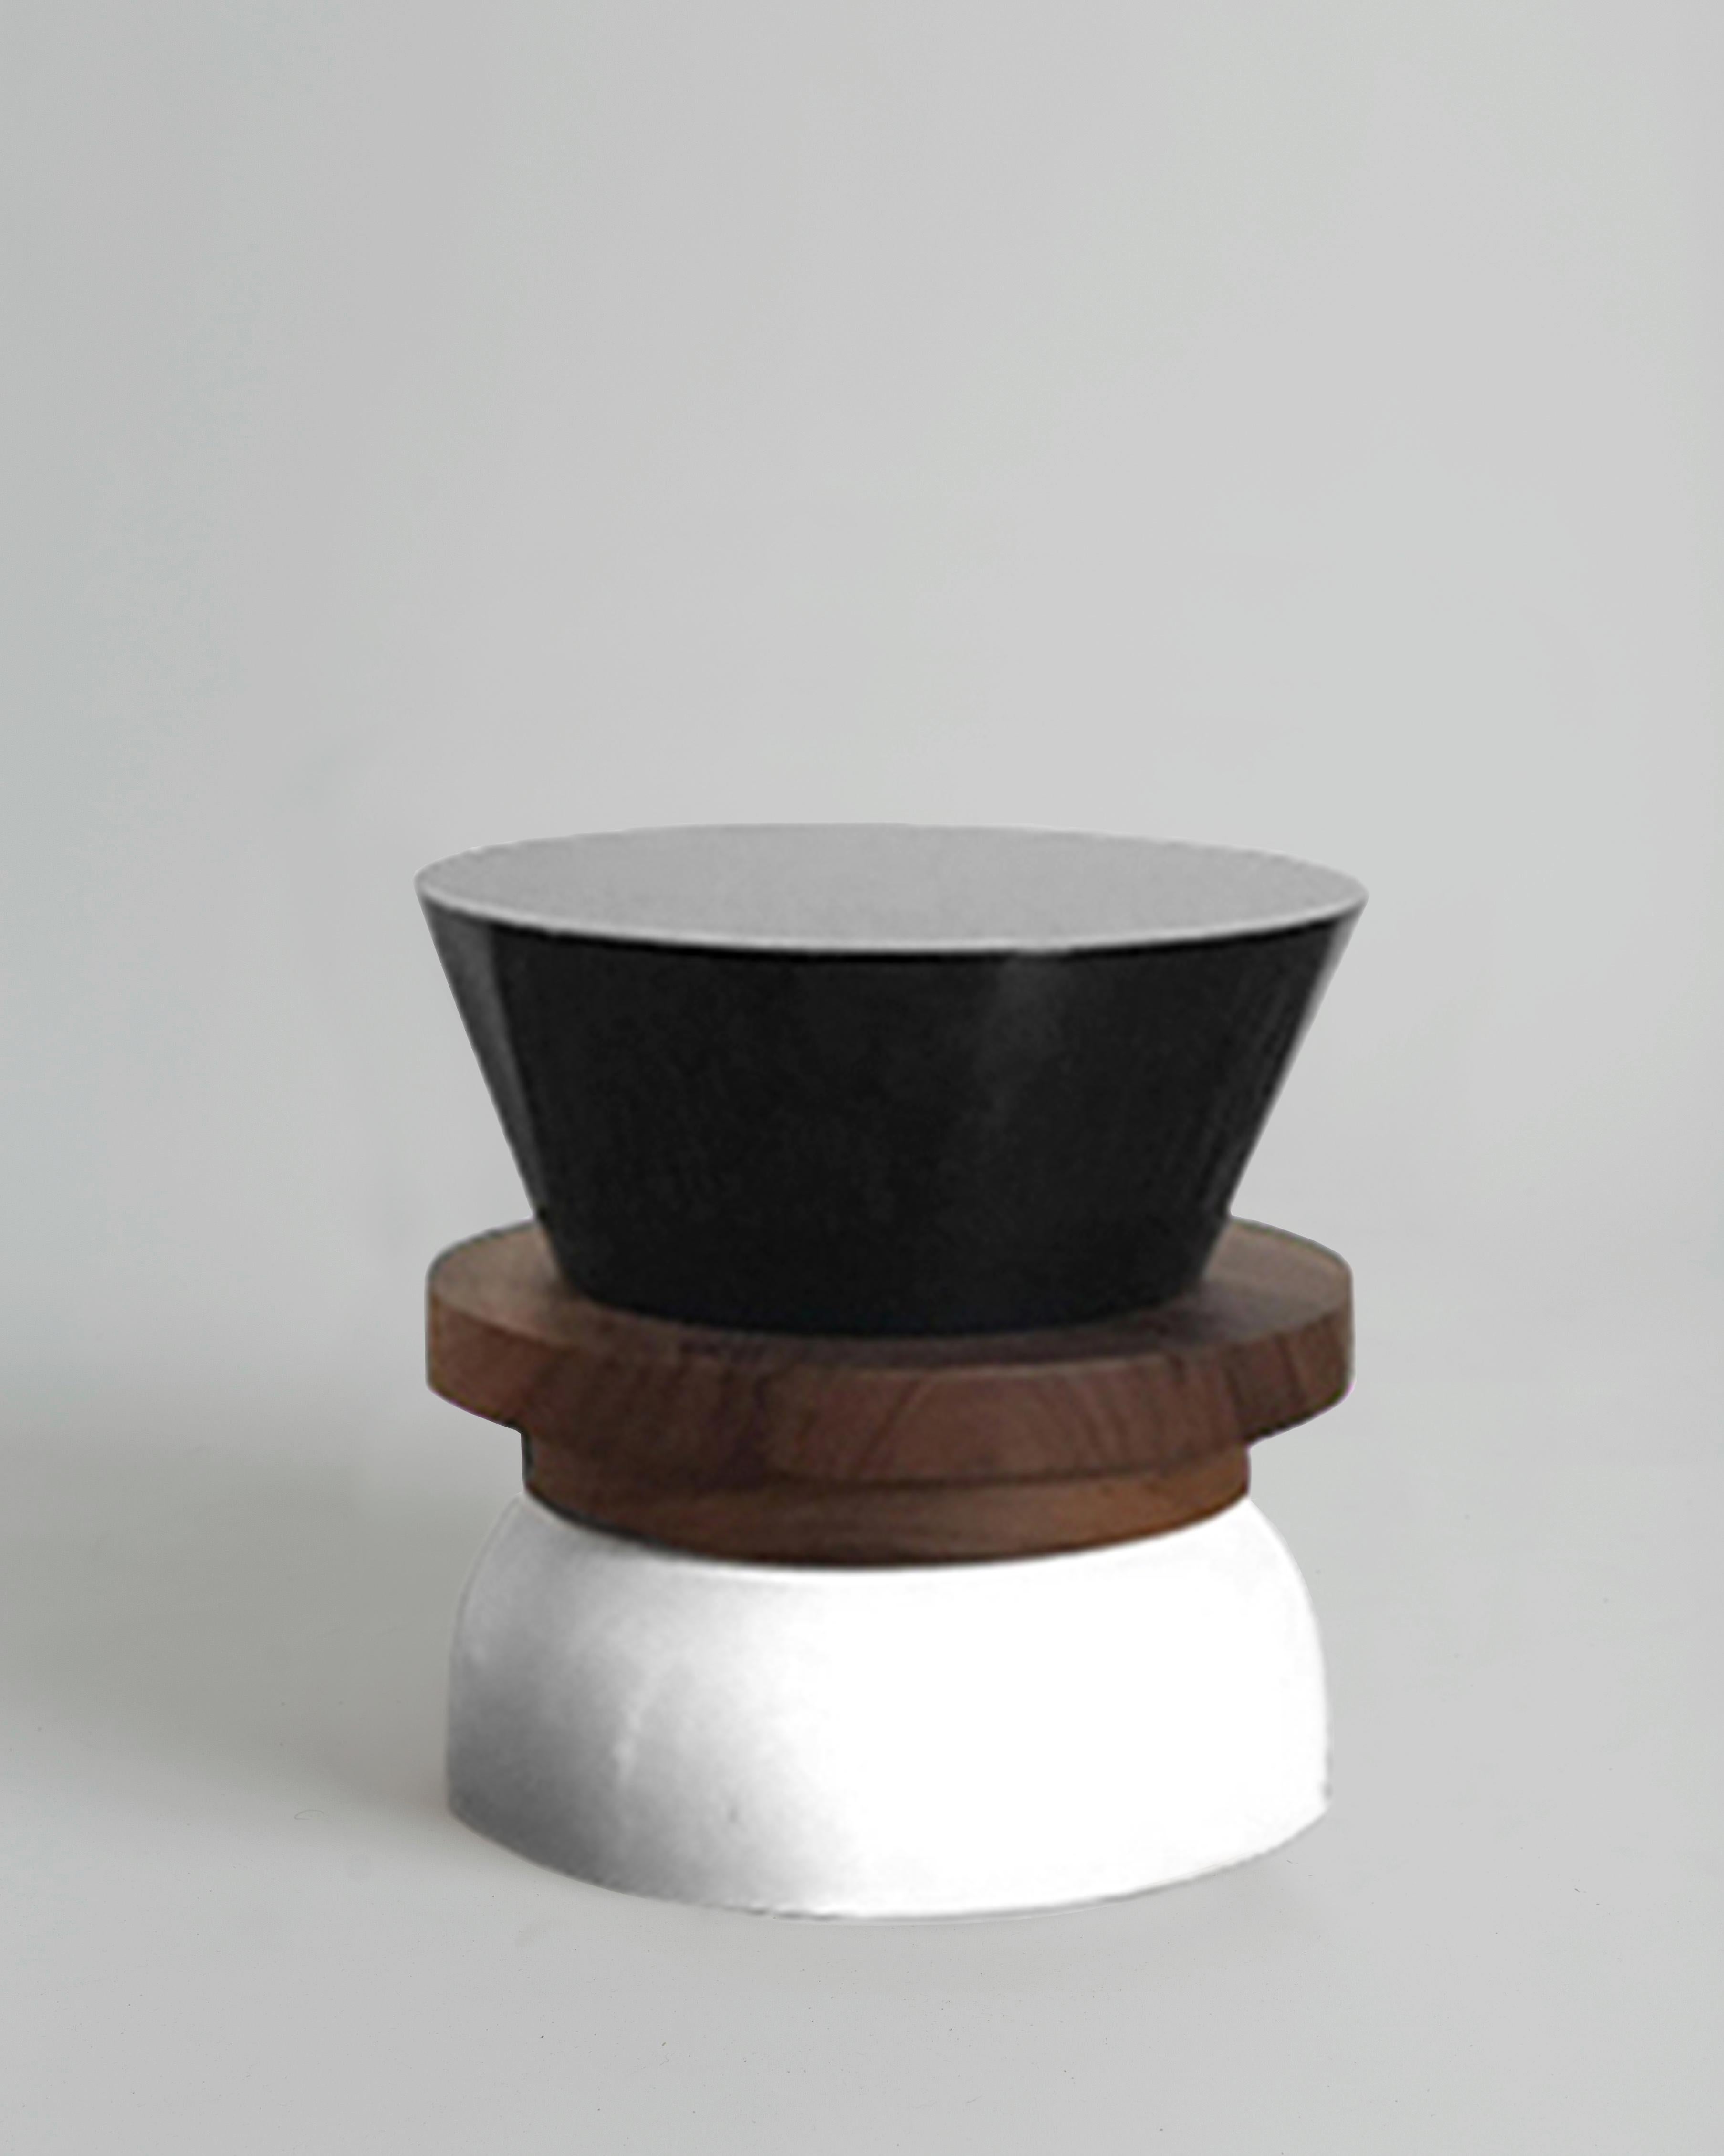 Utility sculpture:
1 TAO, functions as a stool/table 
Create your own TOTEM by stacking 3 or 4 TAOS!
Material: Radiata and Parota wood, high gloss resin finish. (Indoors)

Rebeca Cors (México, 1988) works as an independent artist under the name